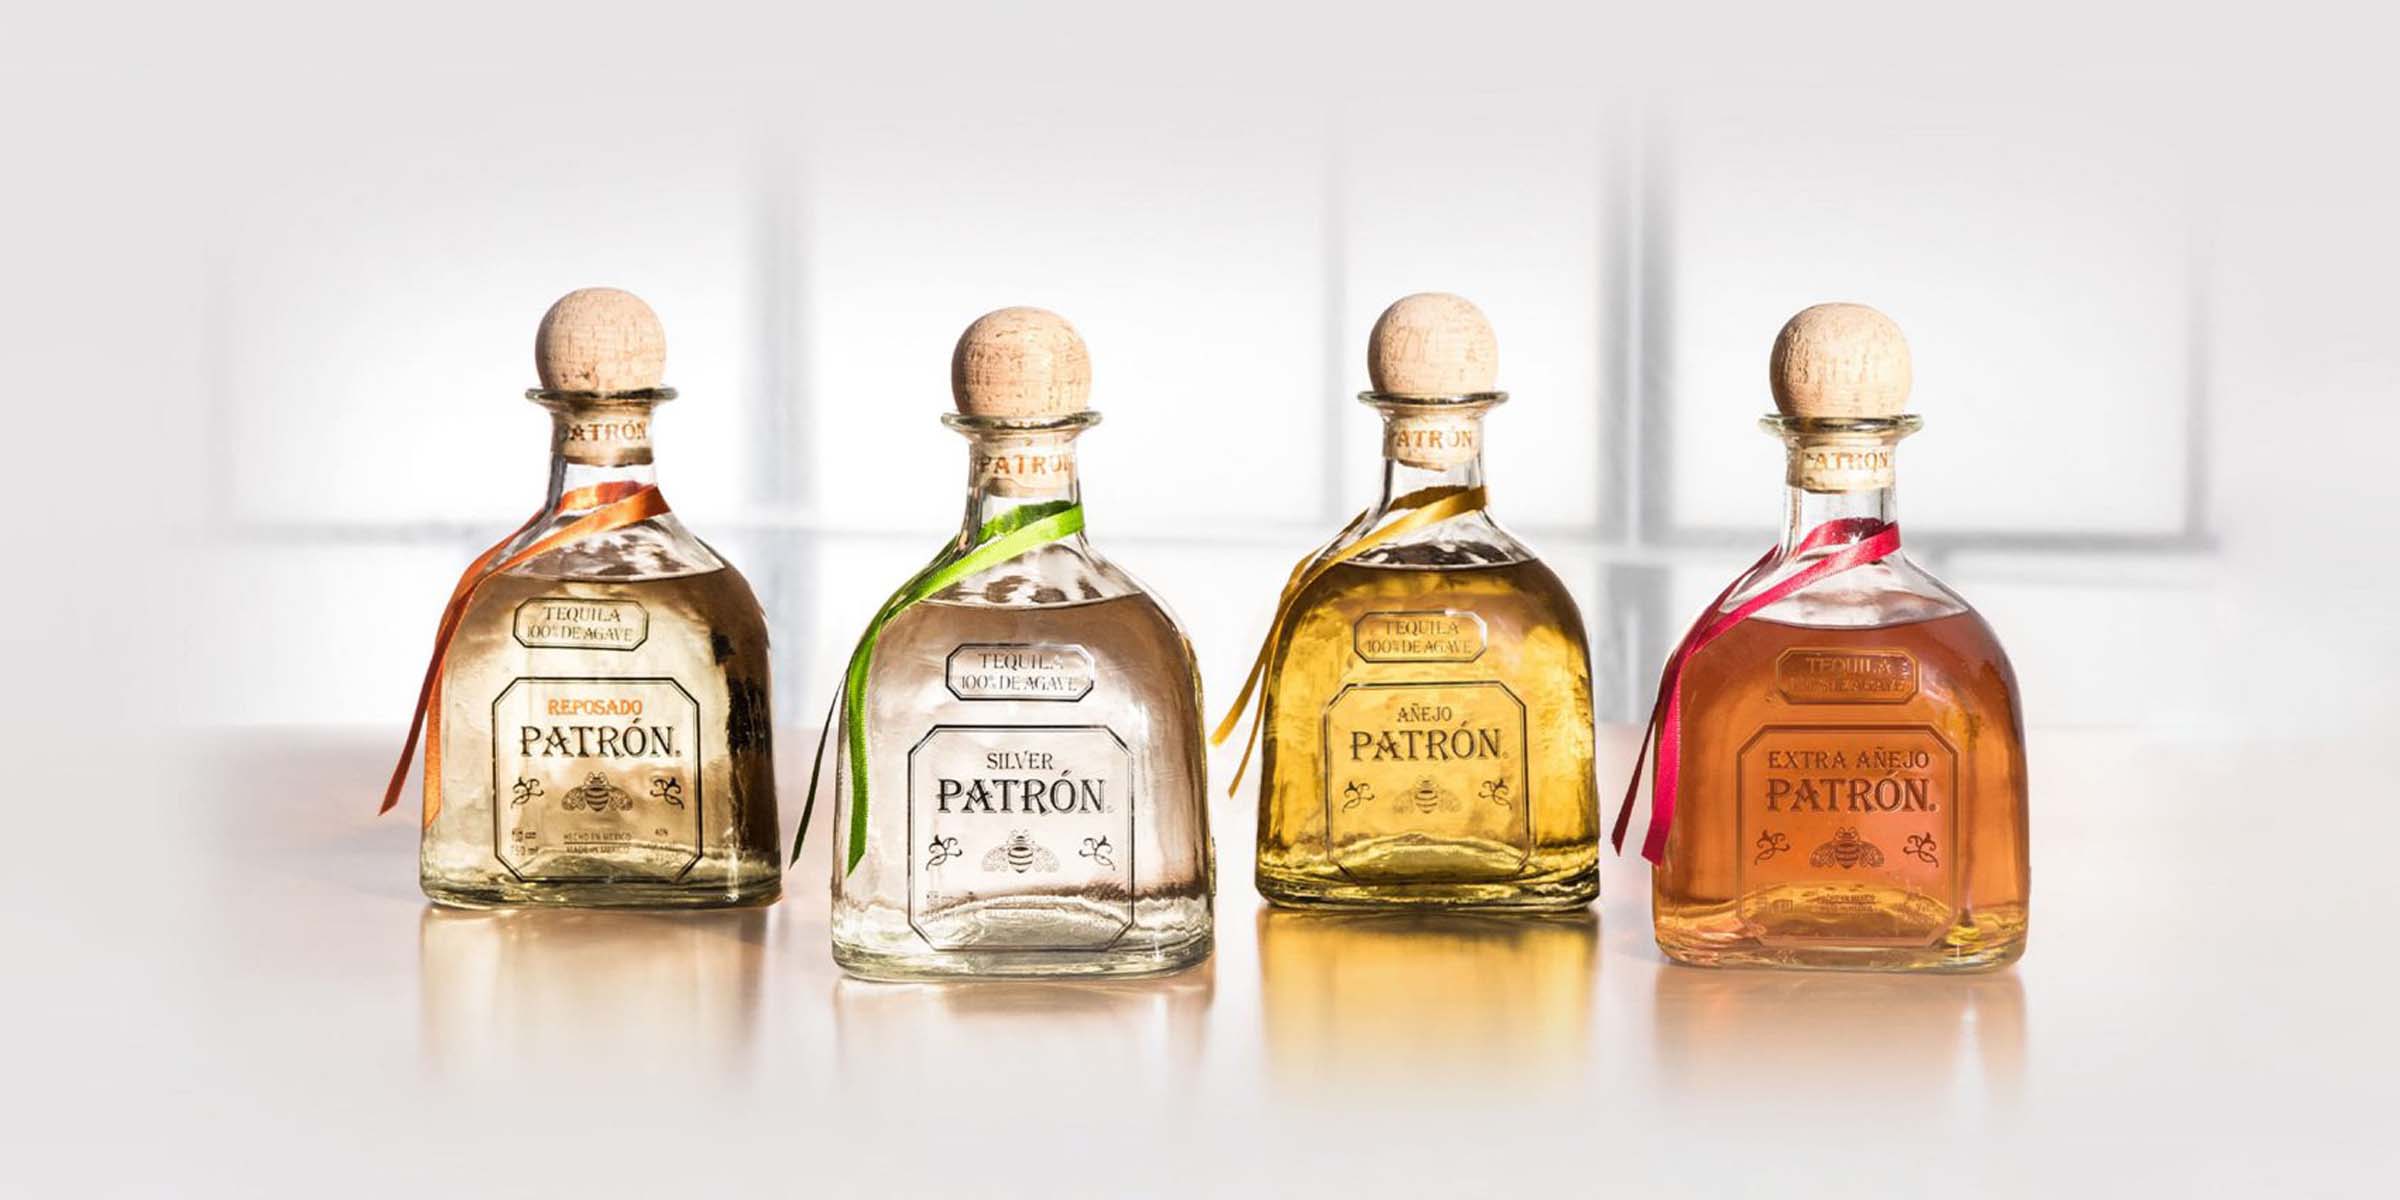 What are the sizes of patron bottles